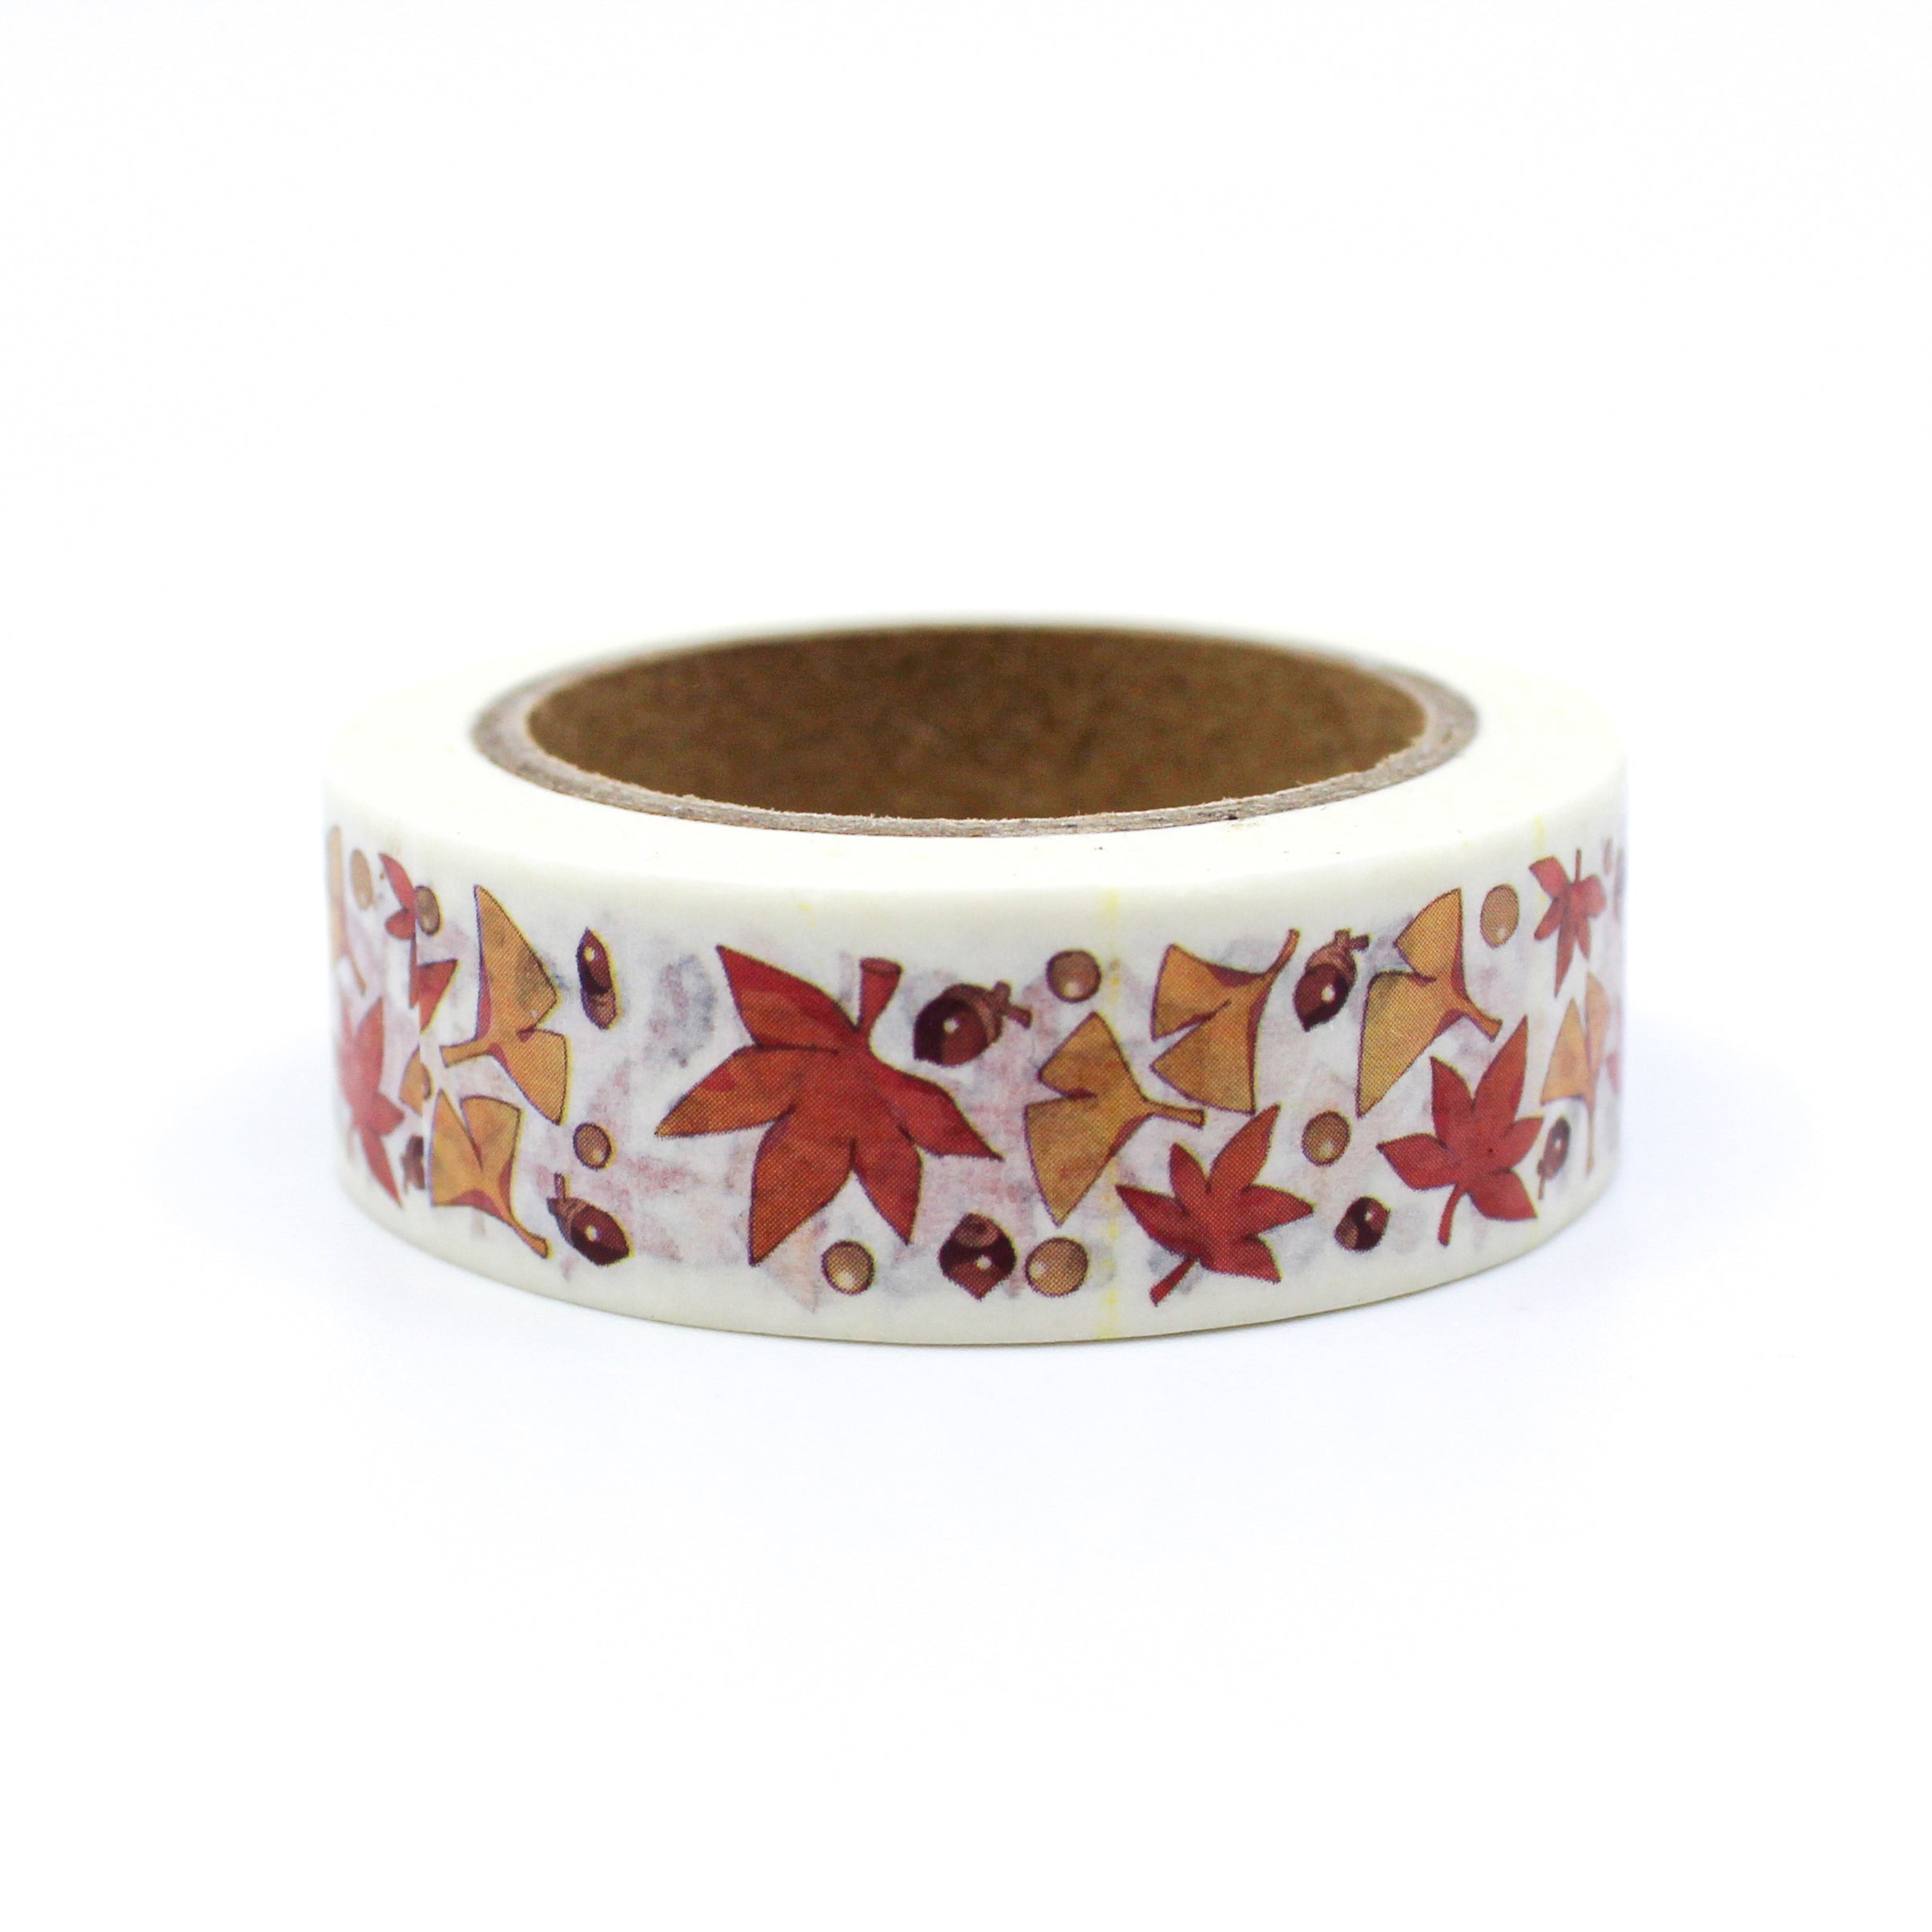 This is a yellow, orange and brown fall leaf and ginkgo pattern washi tape from BBB Supplies Craft Shop